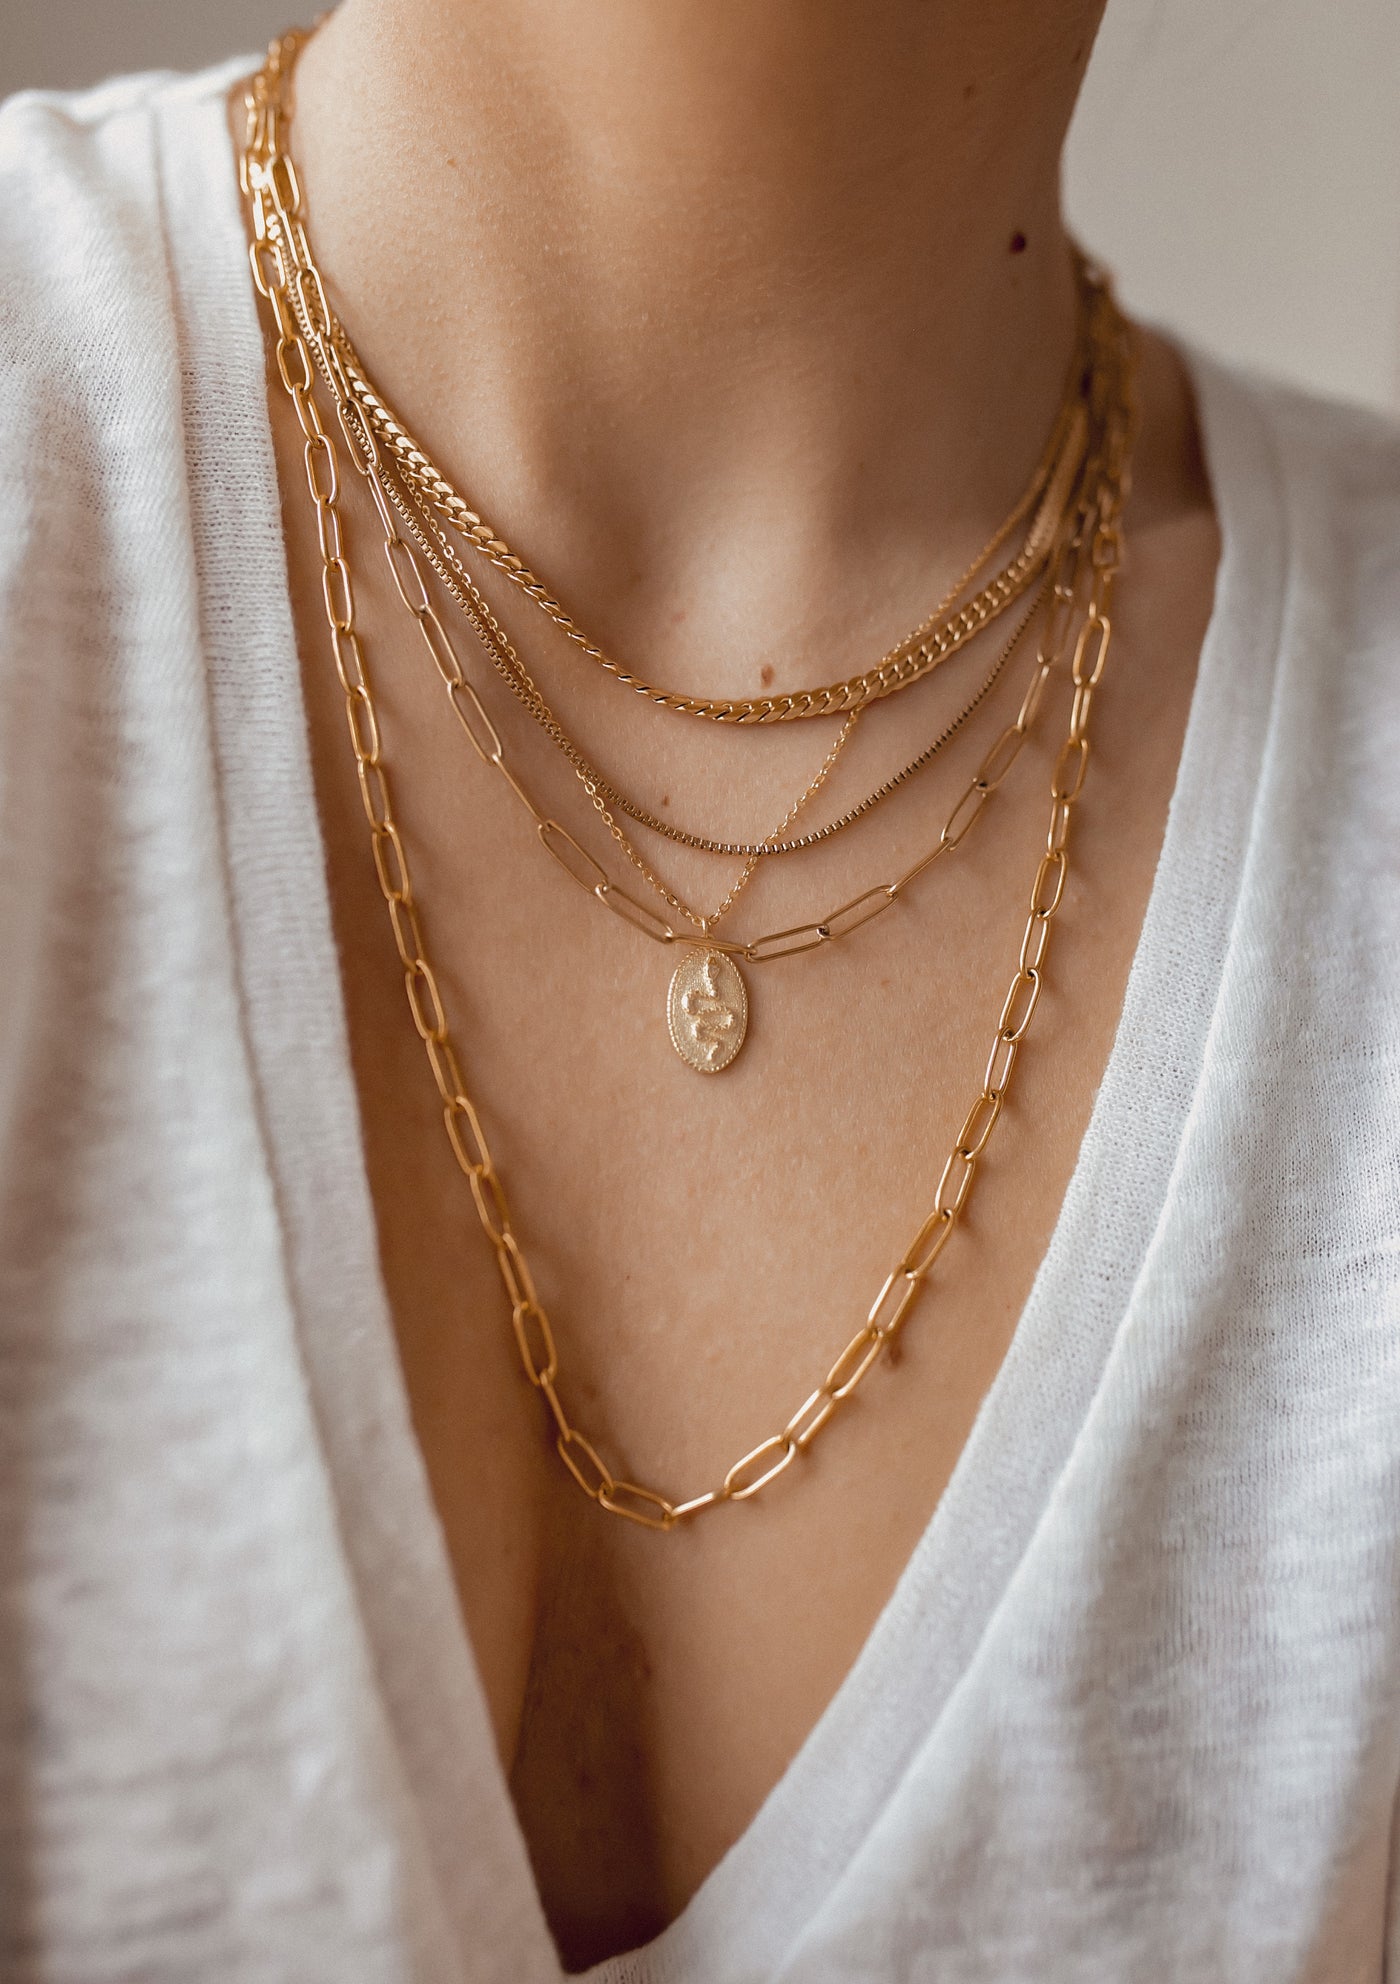 Chunky Chain Y Necklace Gold